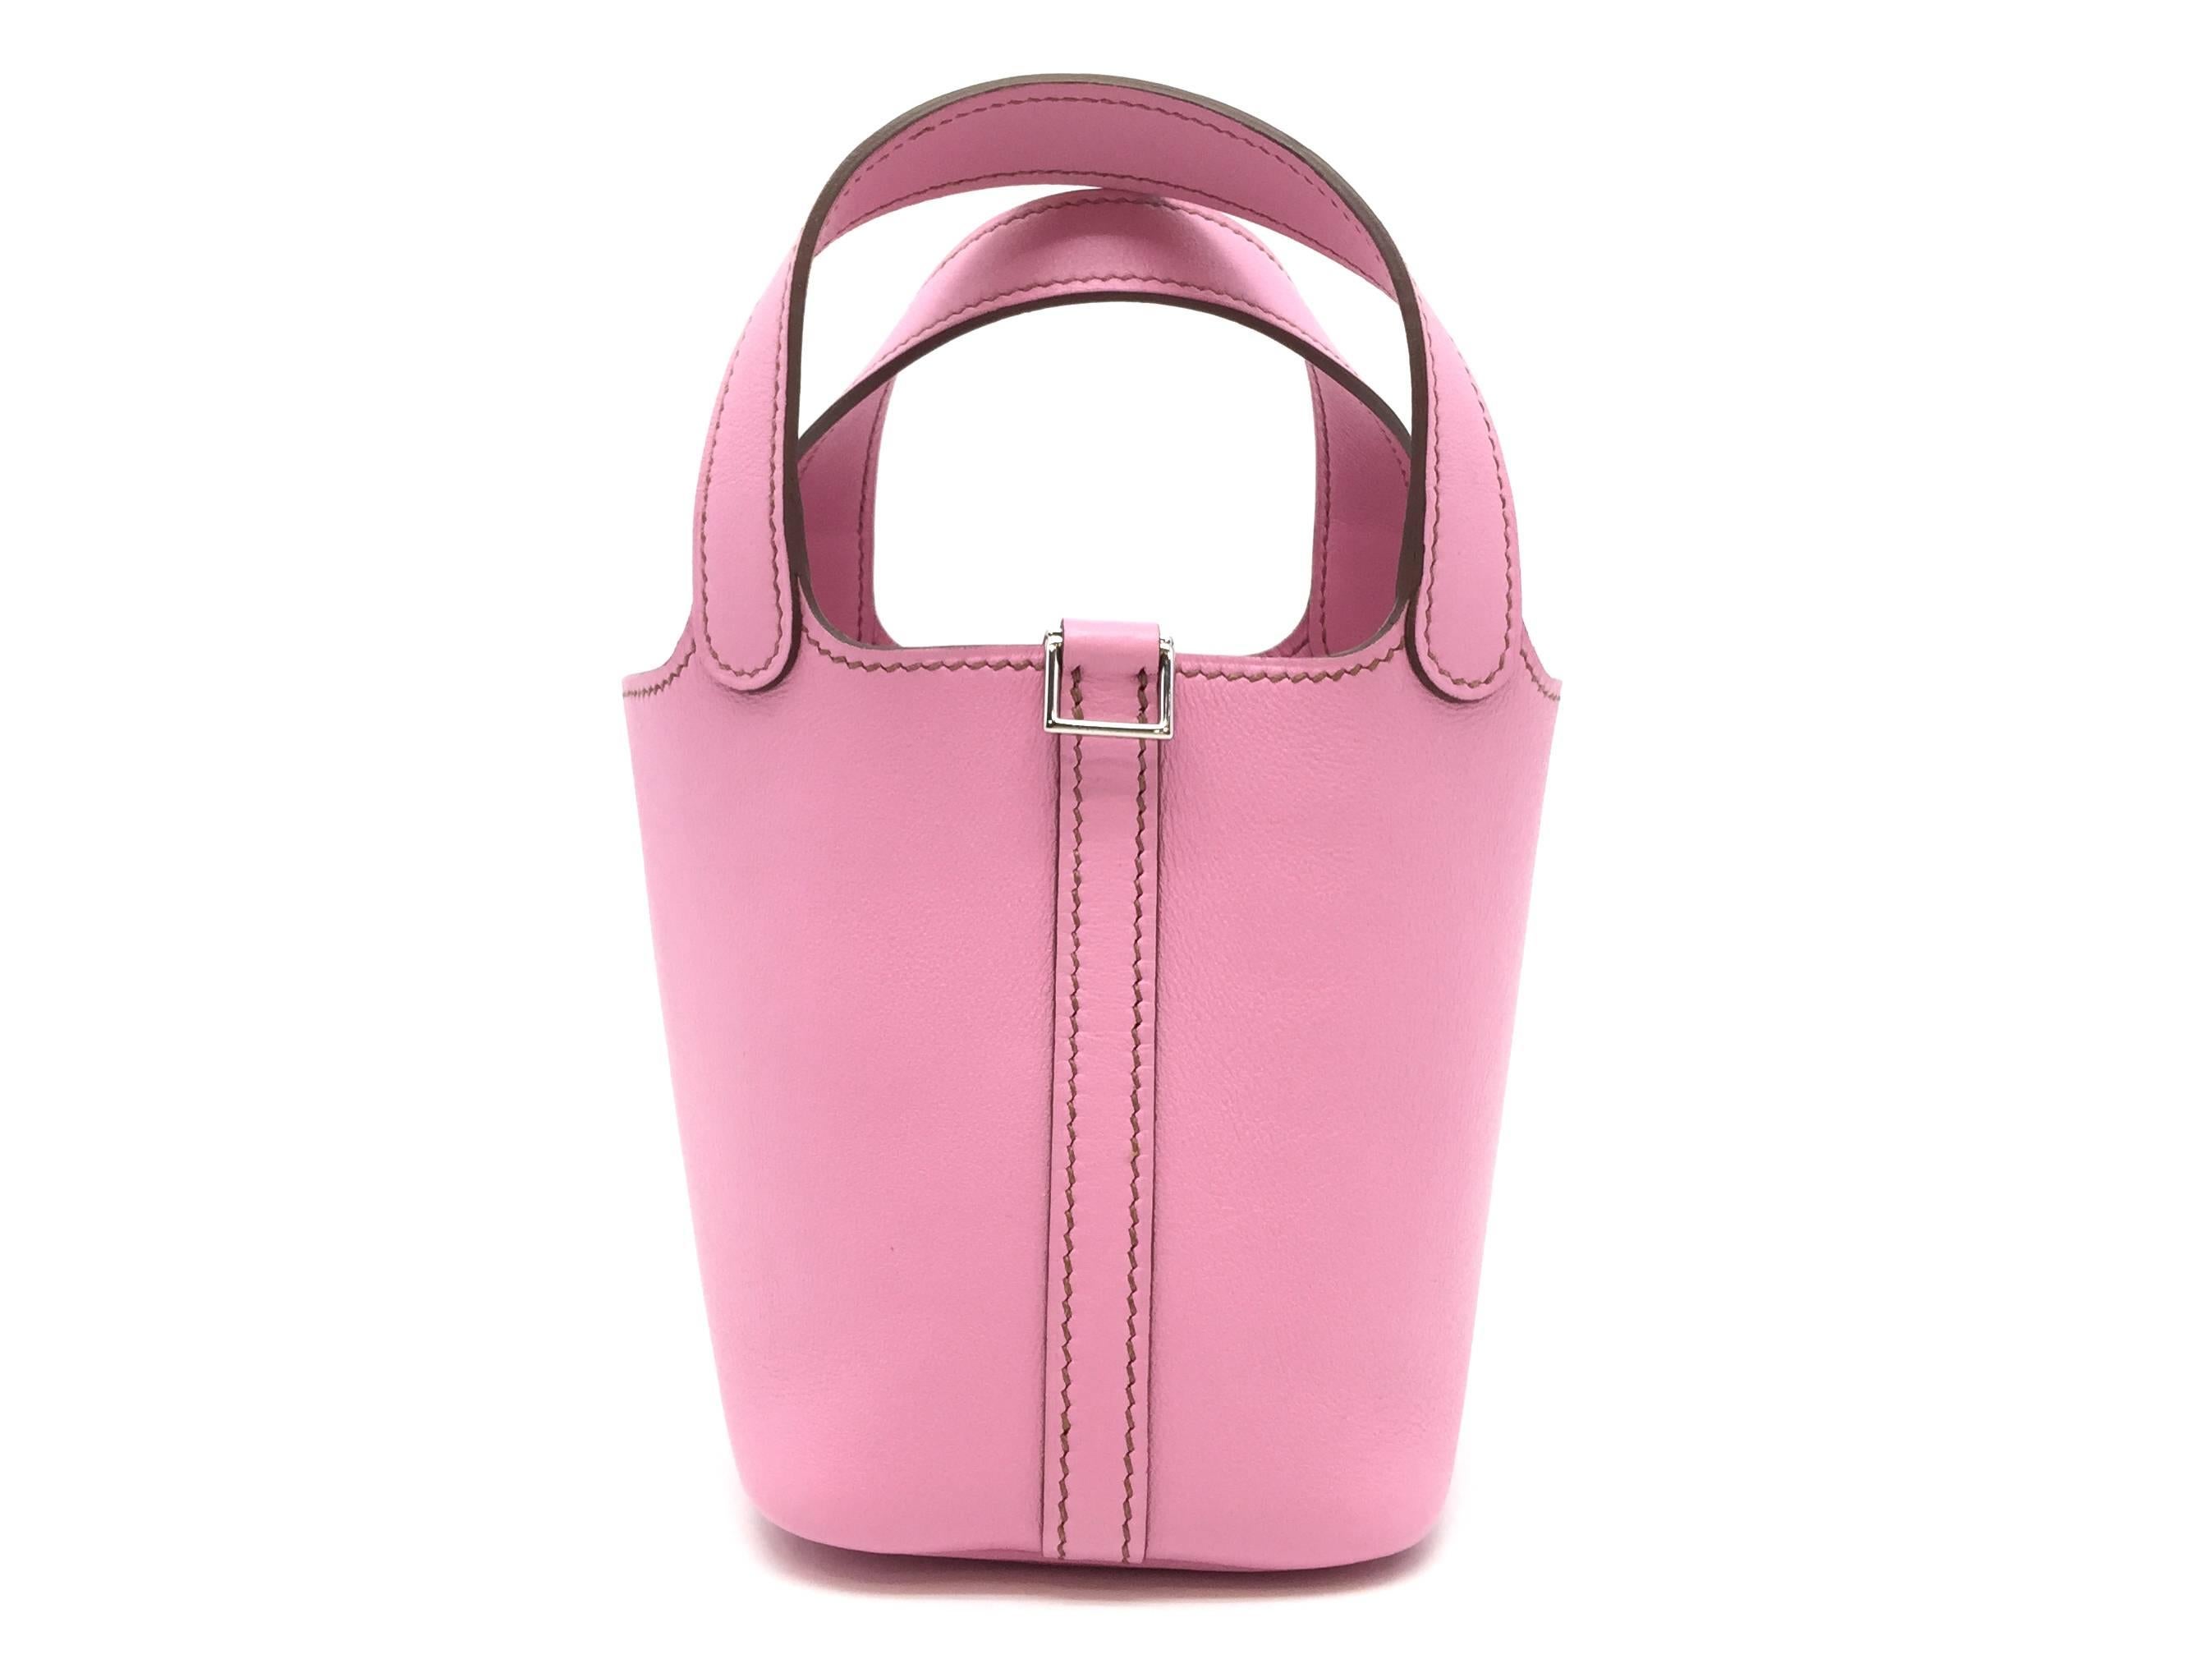 Color: Bubblegum Pink 
Material: Swift Leather 

Condition:
Rank A
Overall: Good, few minor defects
Surface: Good
Corners: Good
Edges: Good
Handles/Straps: Good
Hardware: Minor Scratches

Dimension:
W9 × H12.5 × D12.5cm（W3.5" × H4.9" ×